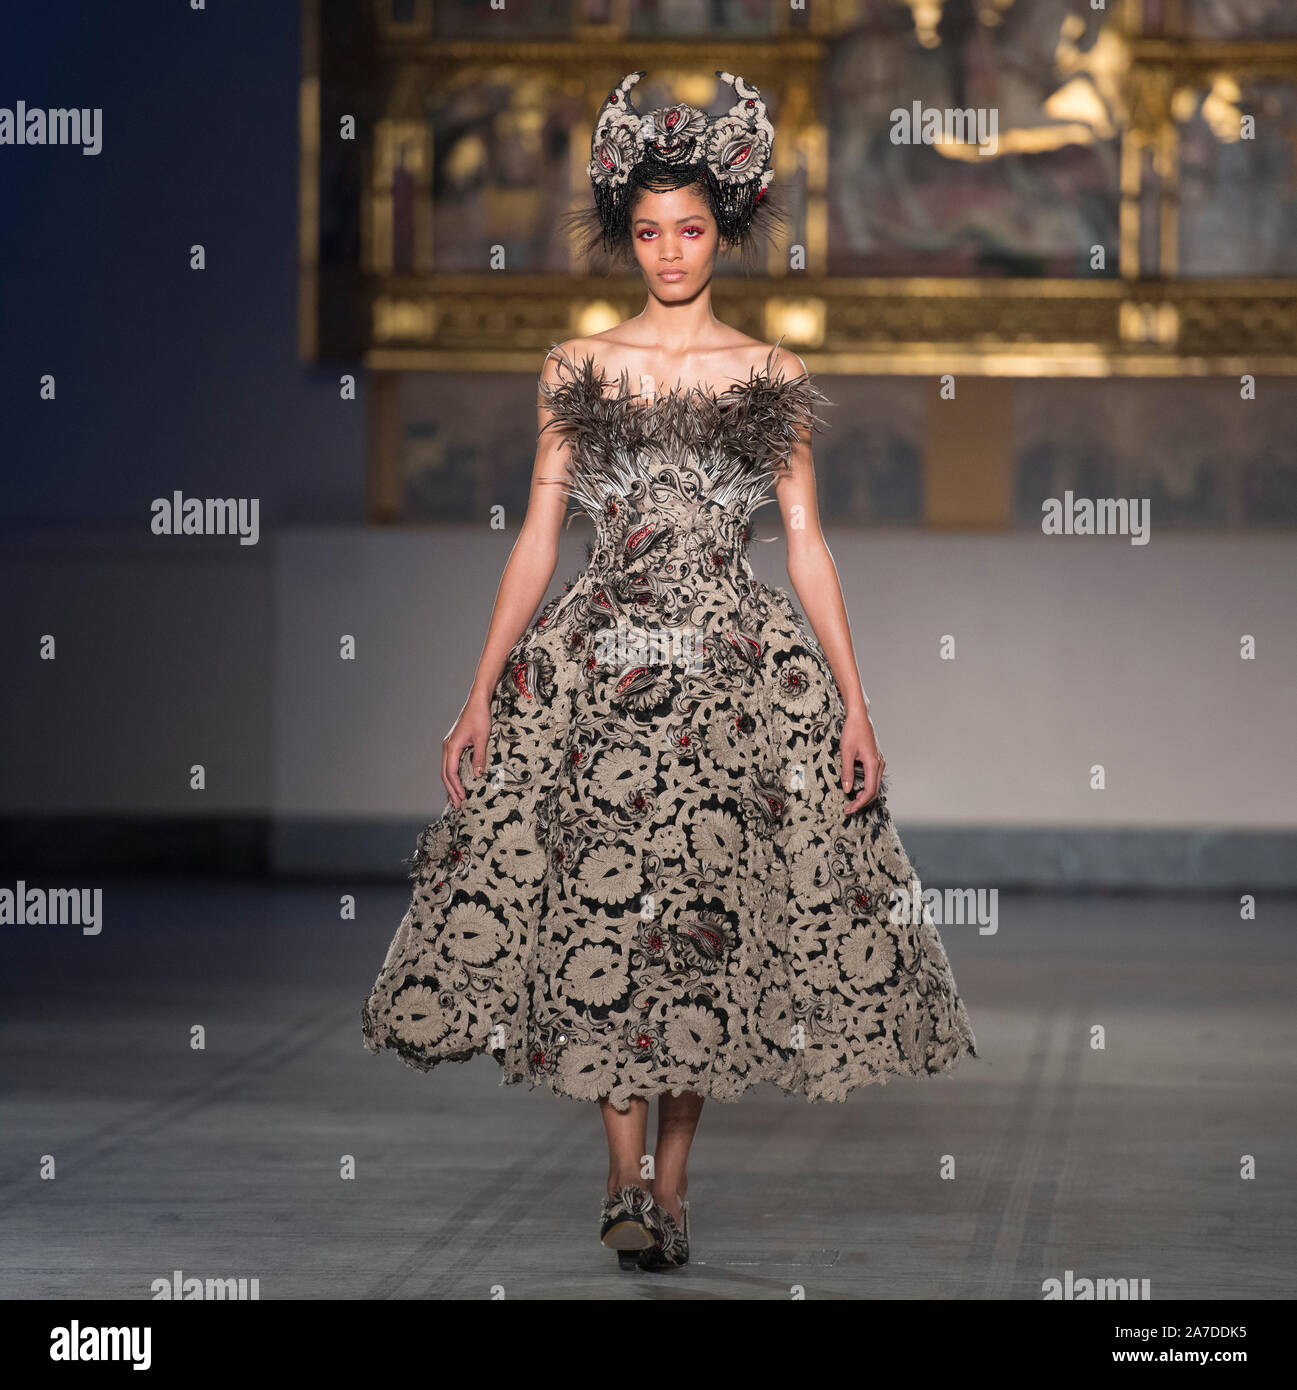 V&A, London, UK. 1st November 2019. Guo Pei, one of China’s most renowned designers, holds first ever runway show in the UK, staged to celebrate the 20th anniversary of the V&A’s Fashion in Motion series, in the dramatic setting of the museum’s Raphael Gallery, models wear colourful pieces from the designers’ AW 2019/20 Alternate Universe Couture collection. Credit: Malcolm Park/Alamy Live News. Stock Photo